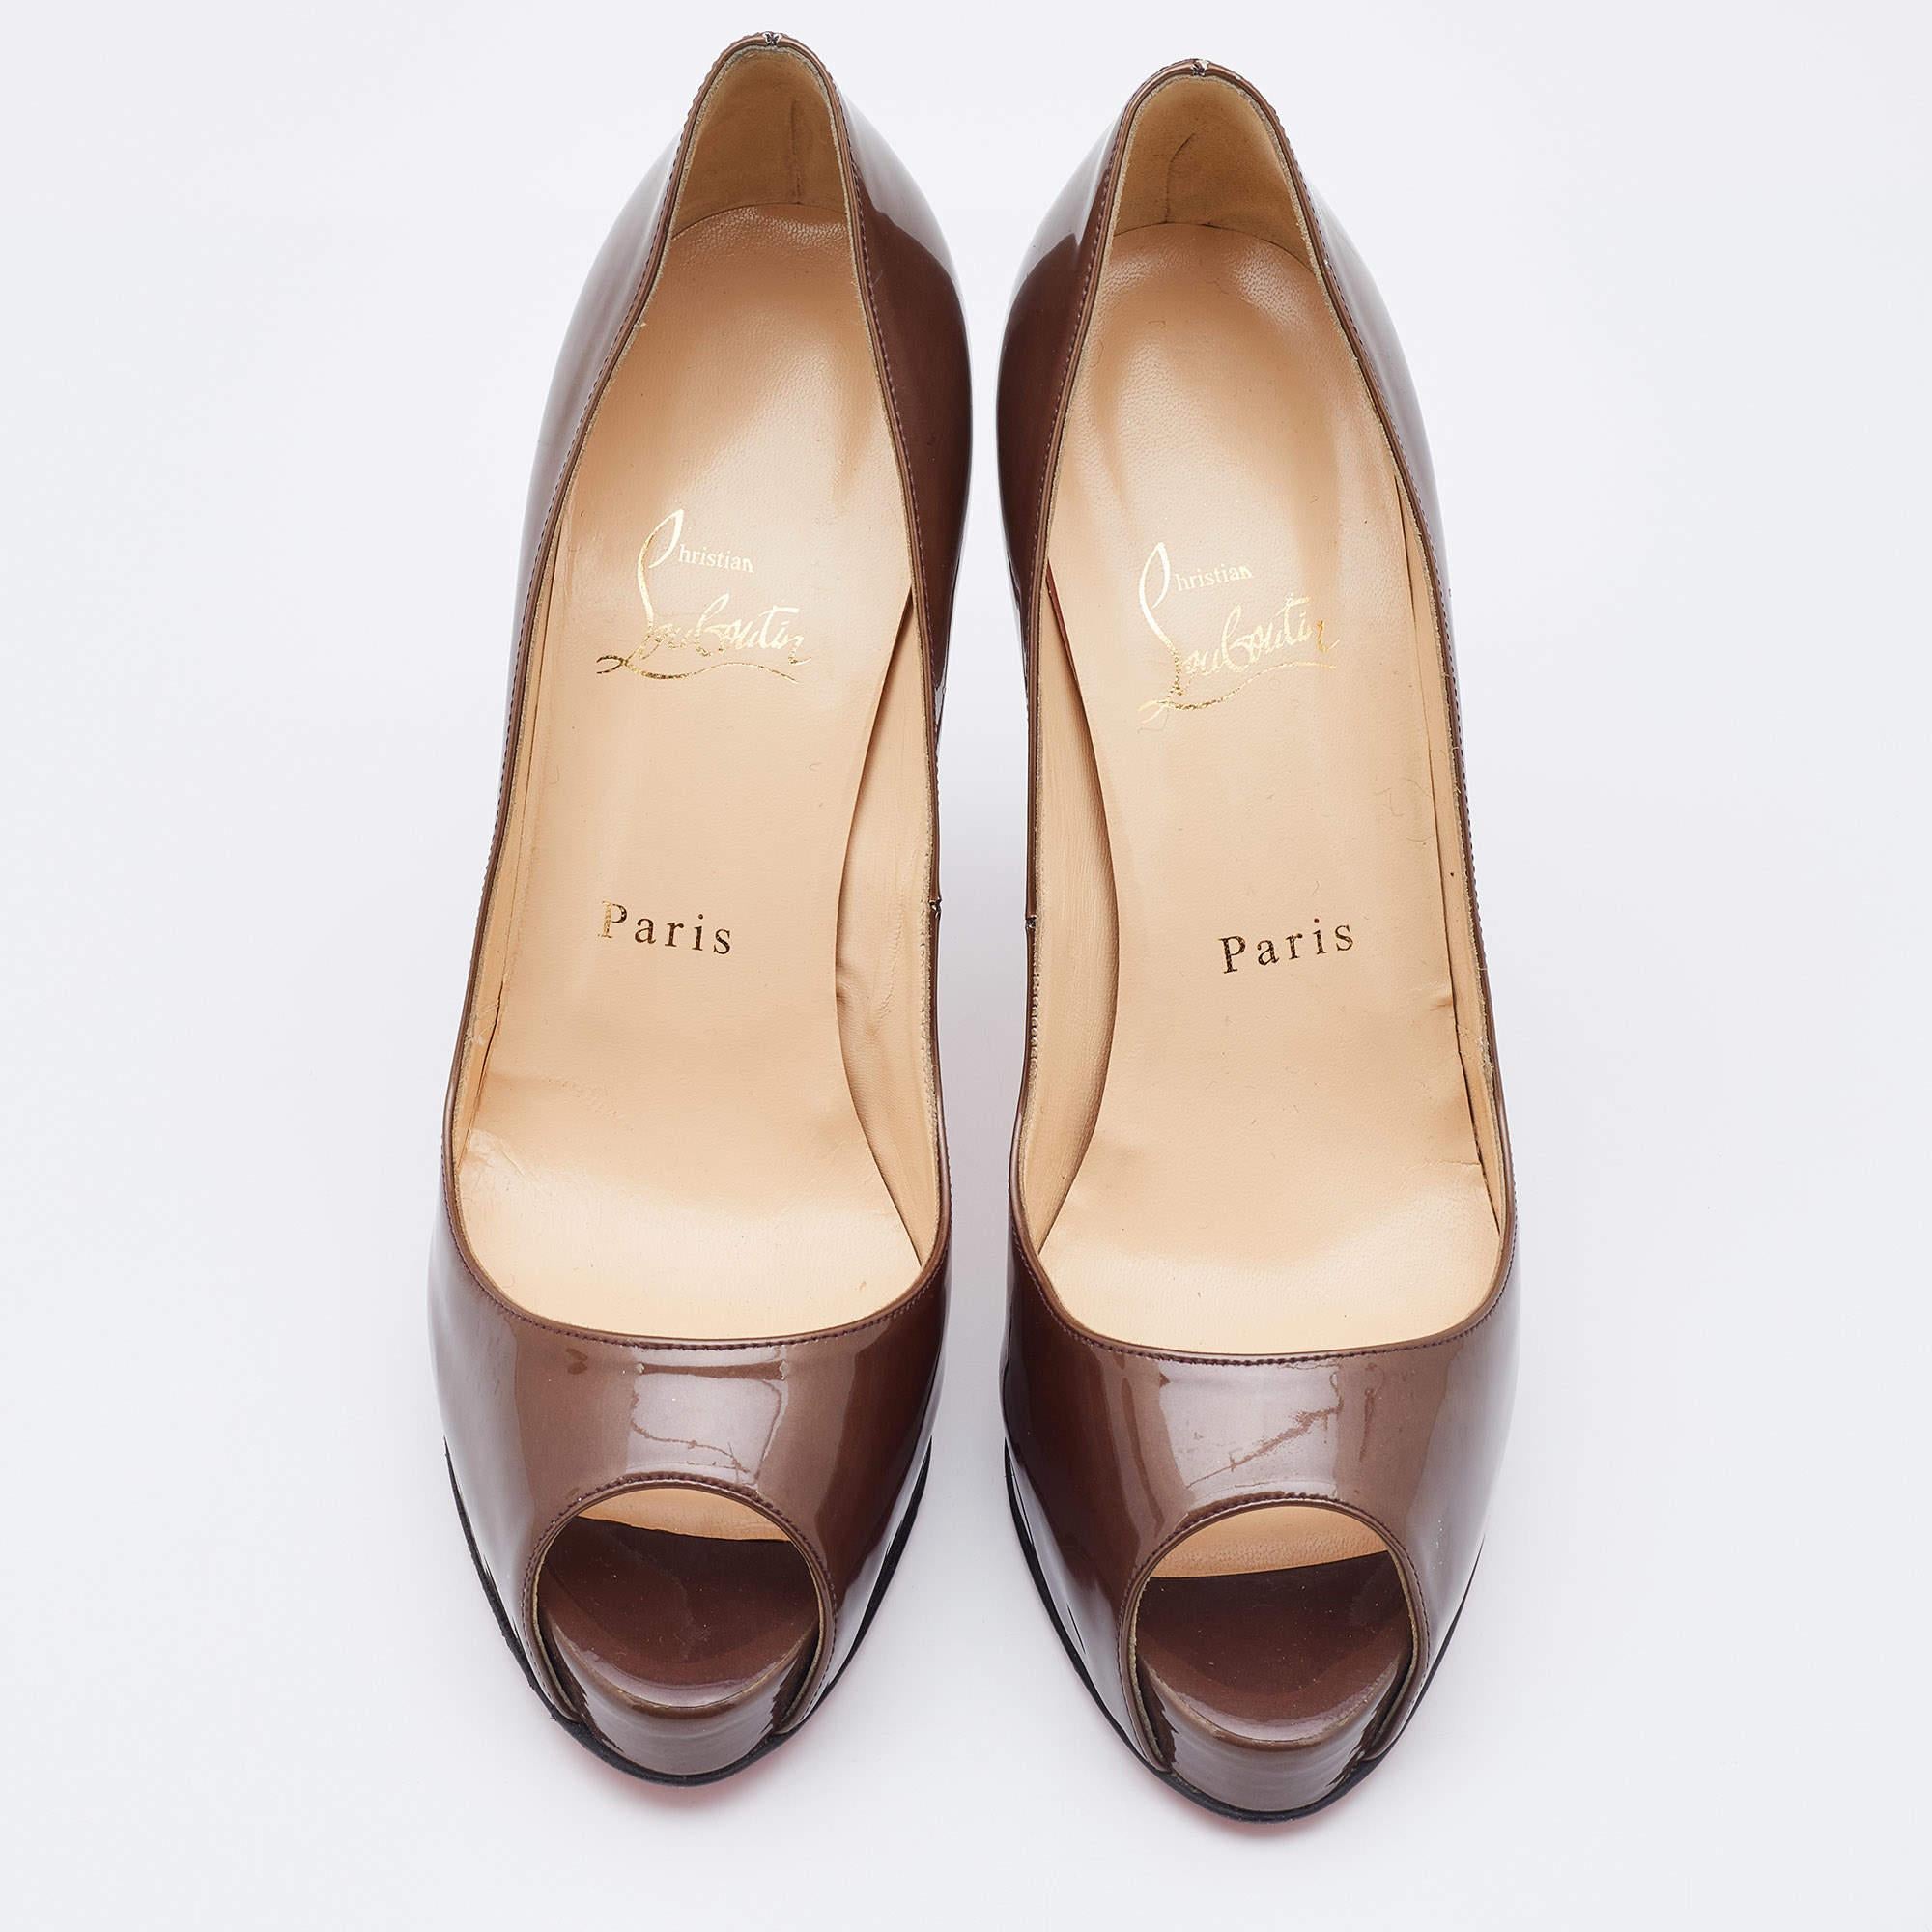 Christian Louboutin Brown Patent Leather New Very Prive Pumps Size 38.5 For Sale 4